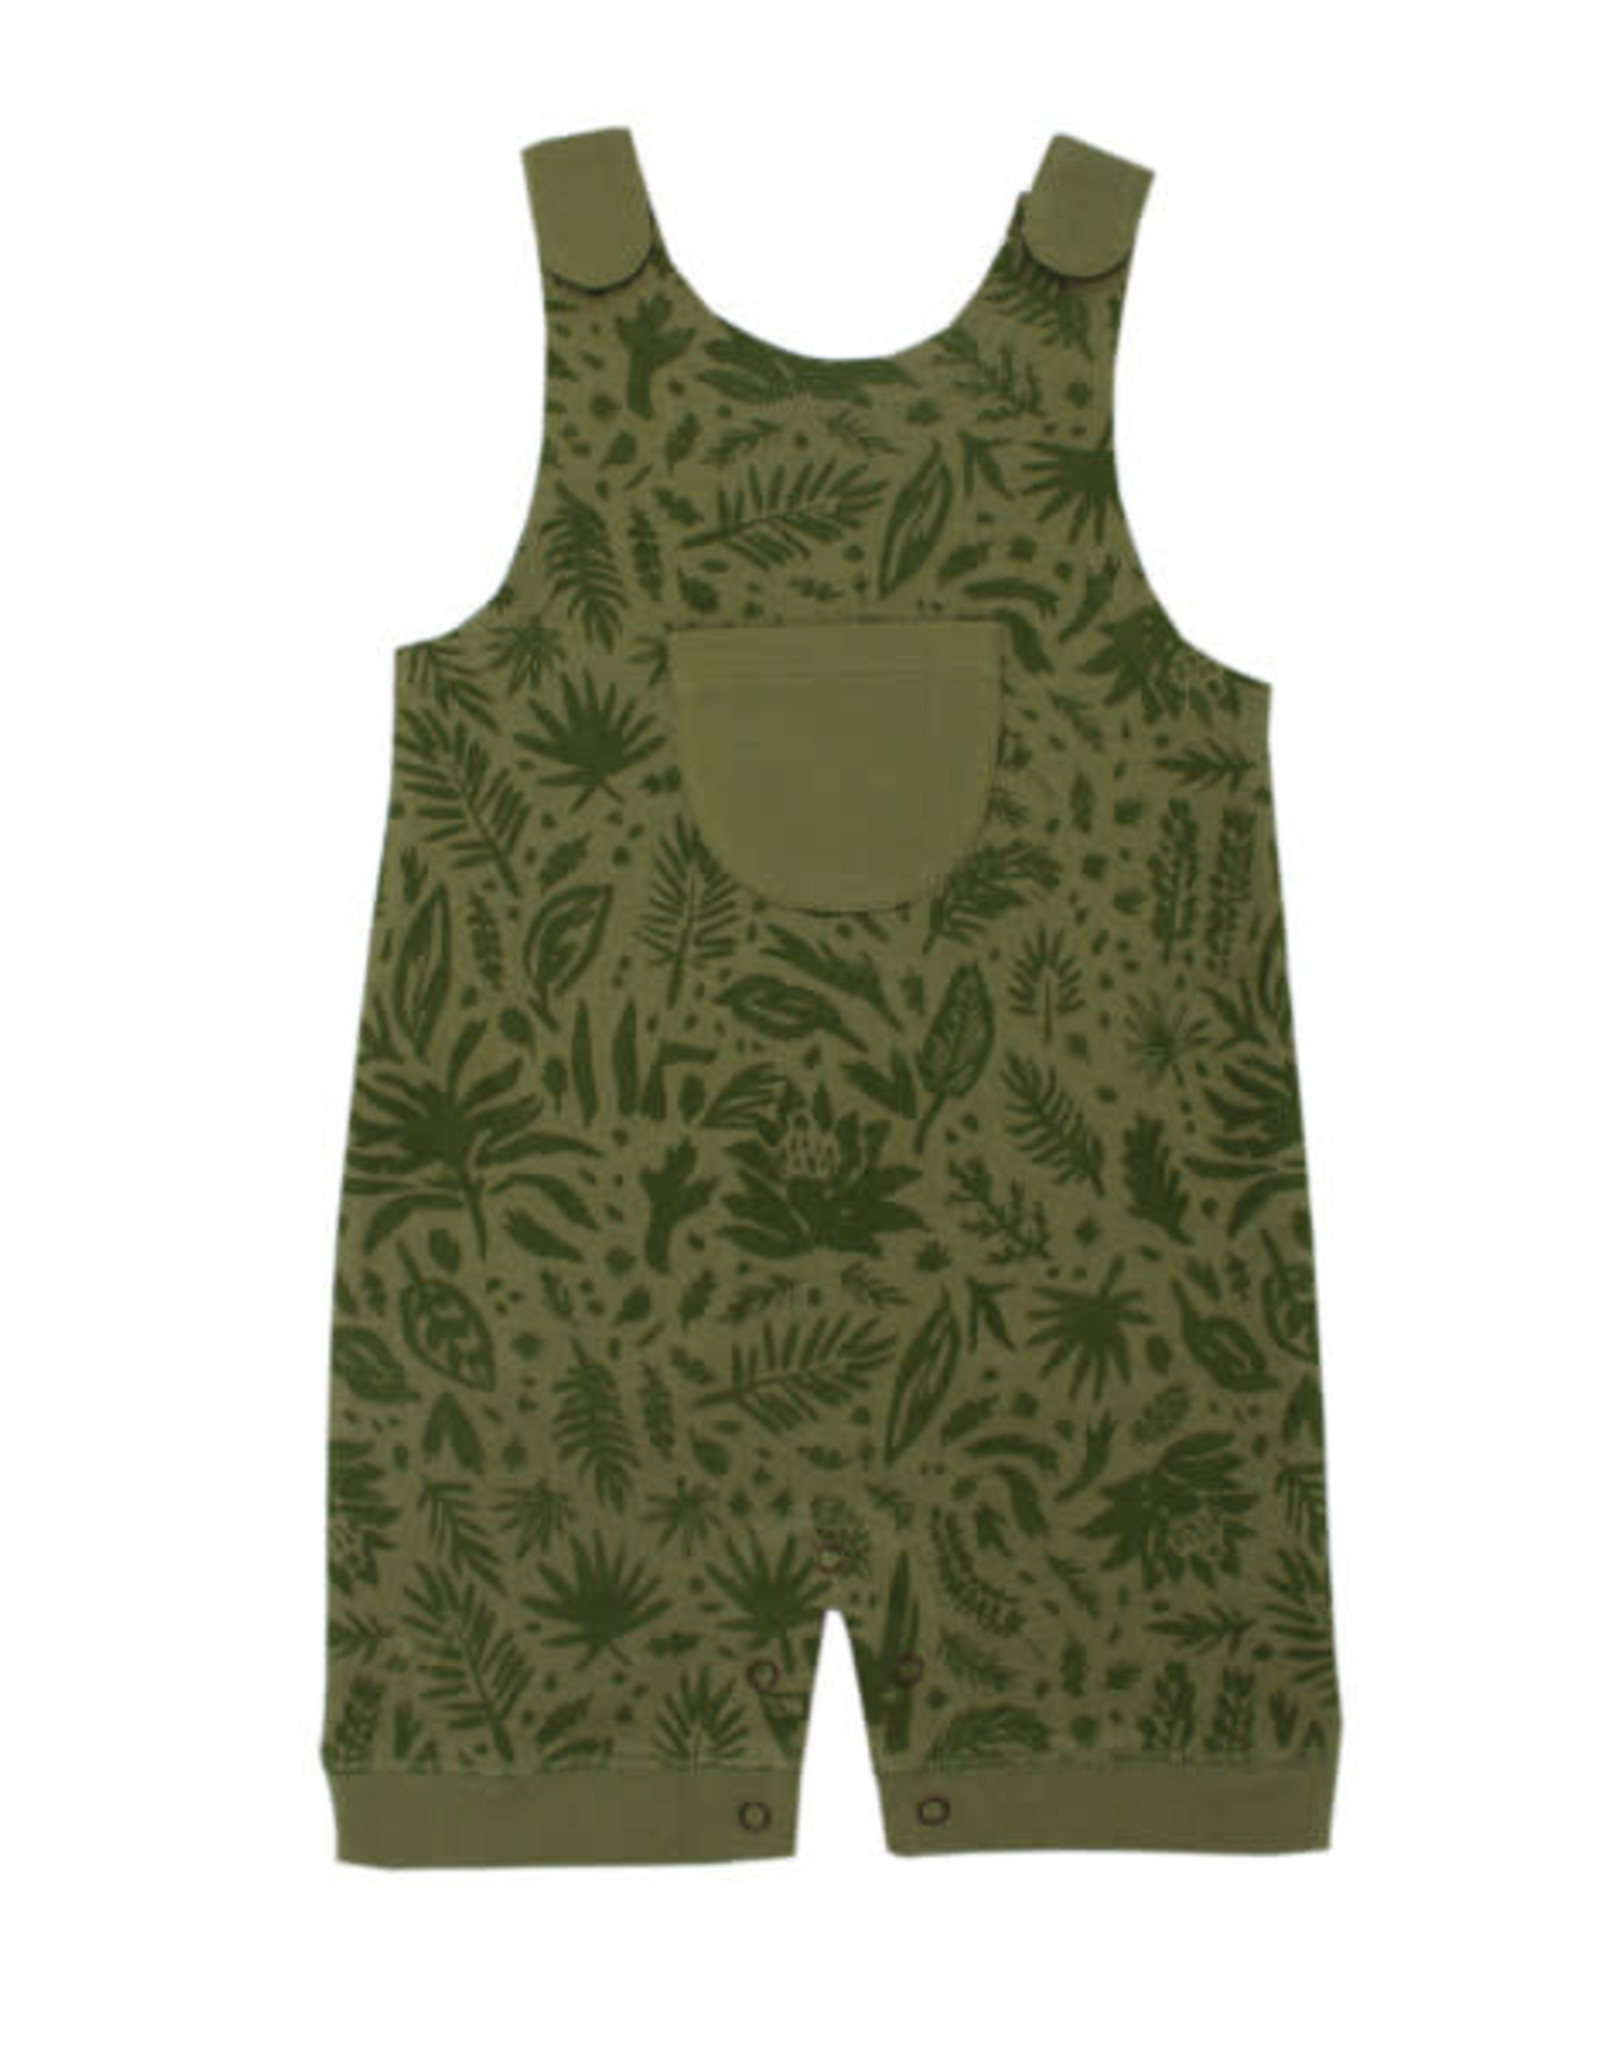 L'oved Baby Sleeveless Romper Get Clover It!